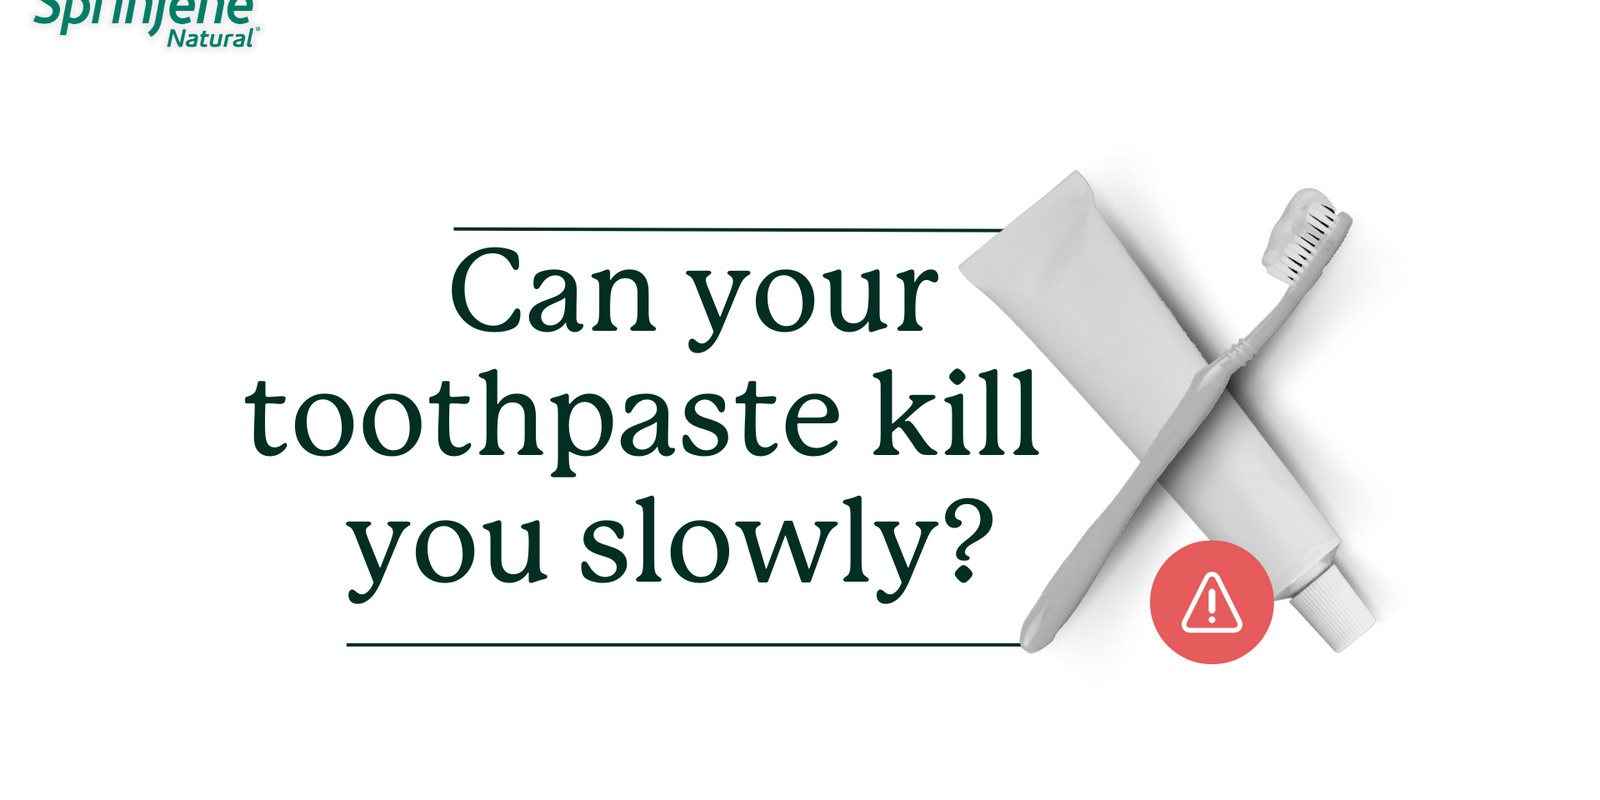 Can your toothpaste kill you slowly?